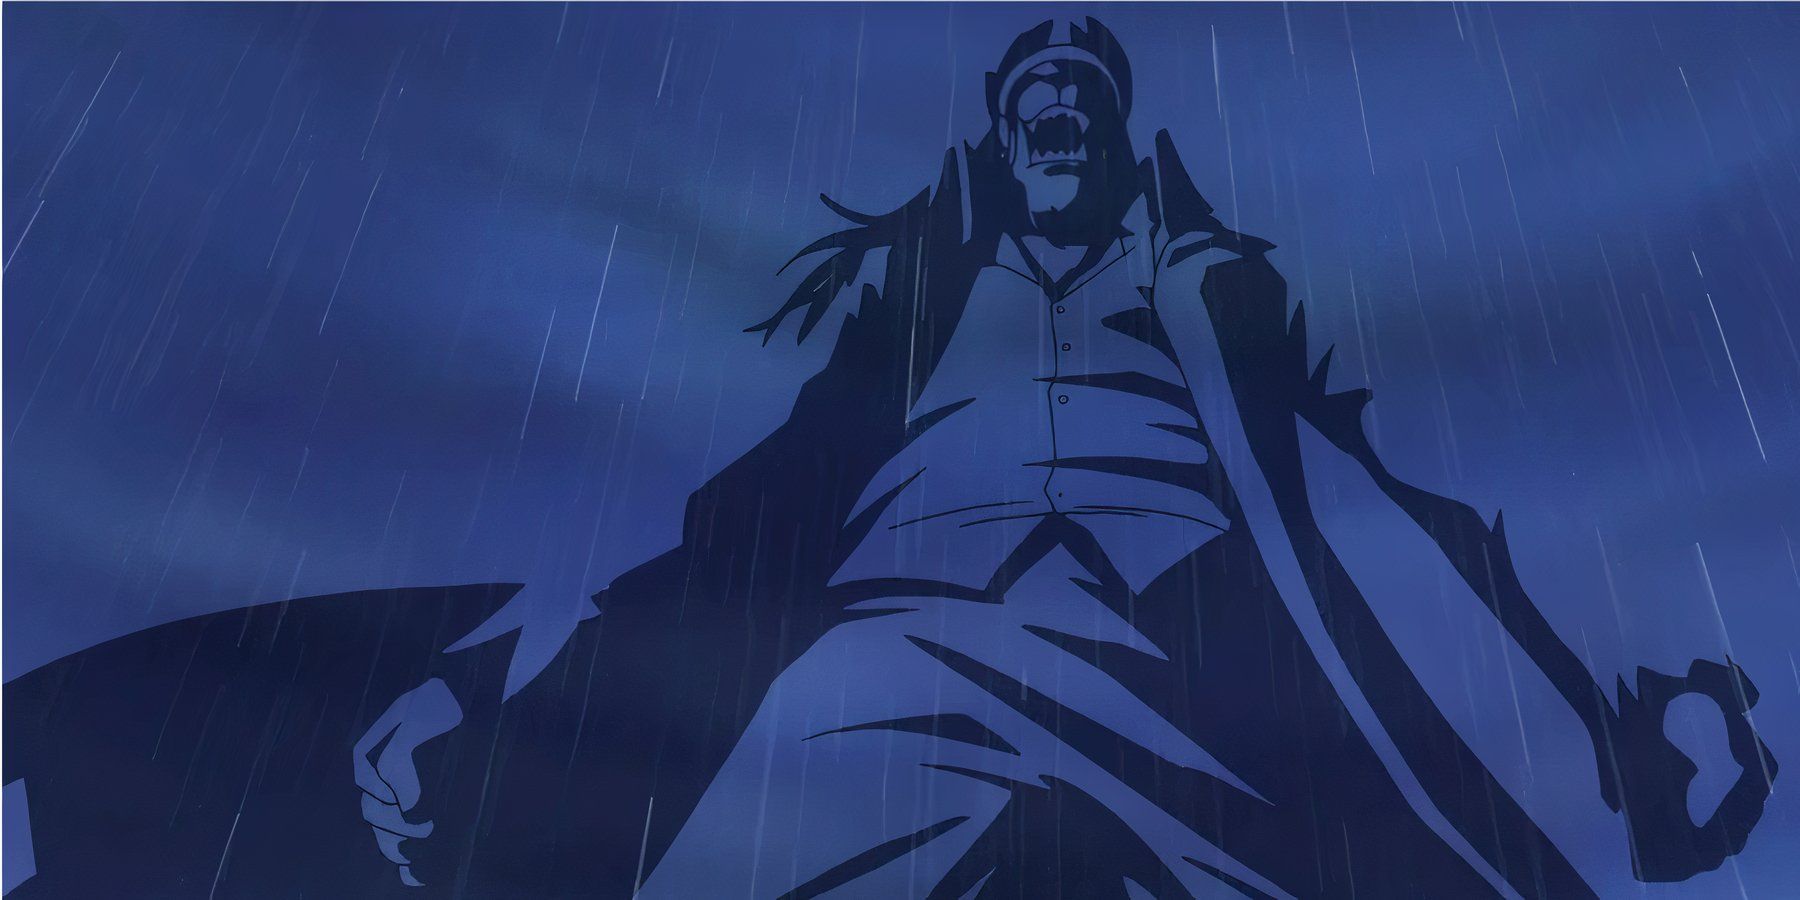 Absalom laughs in the rain while using the Clear-Clear Fruit's invisibility in One Piece.